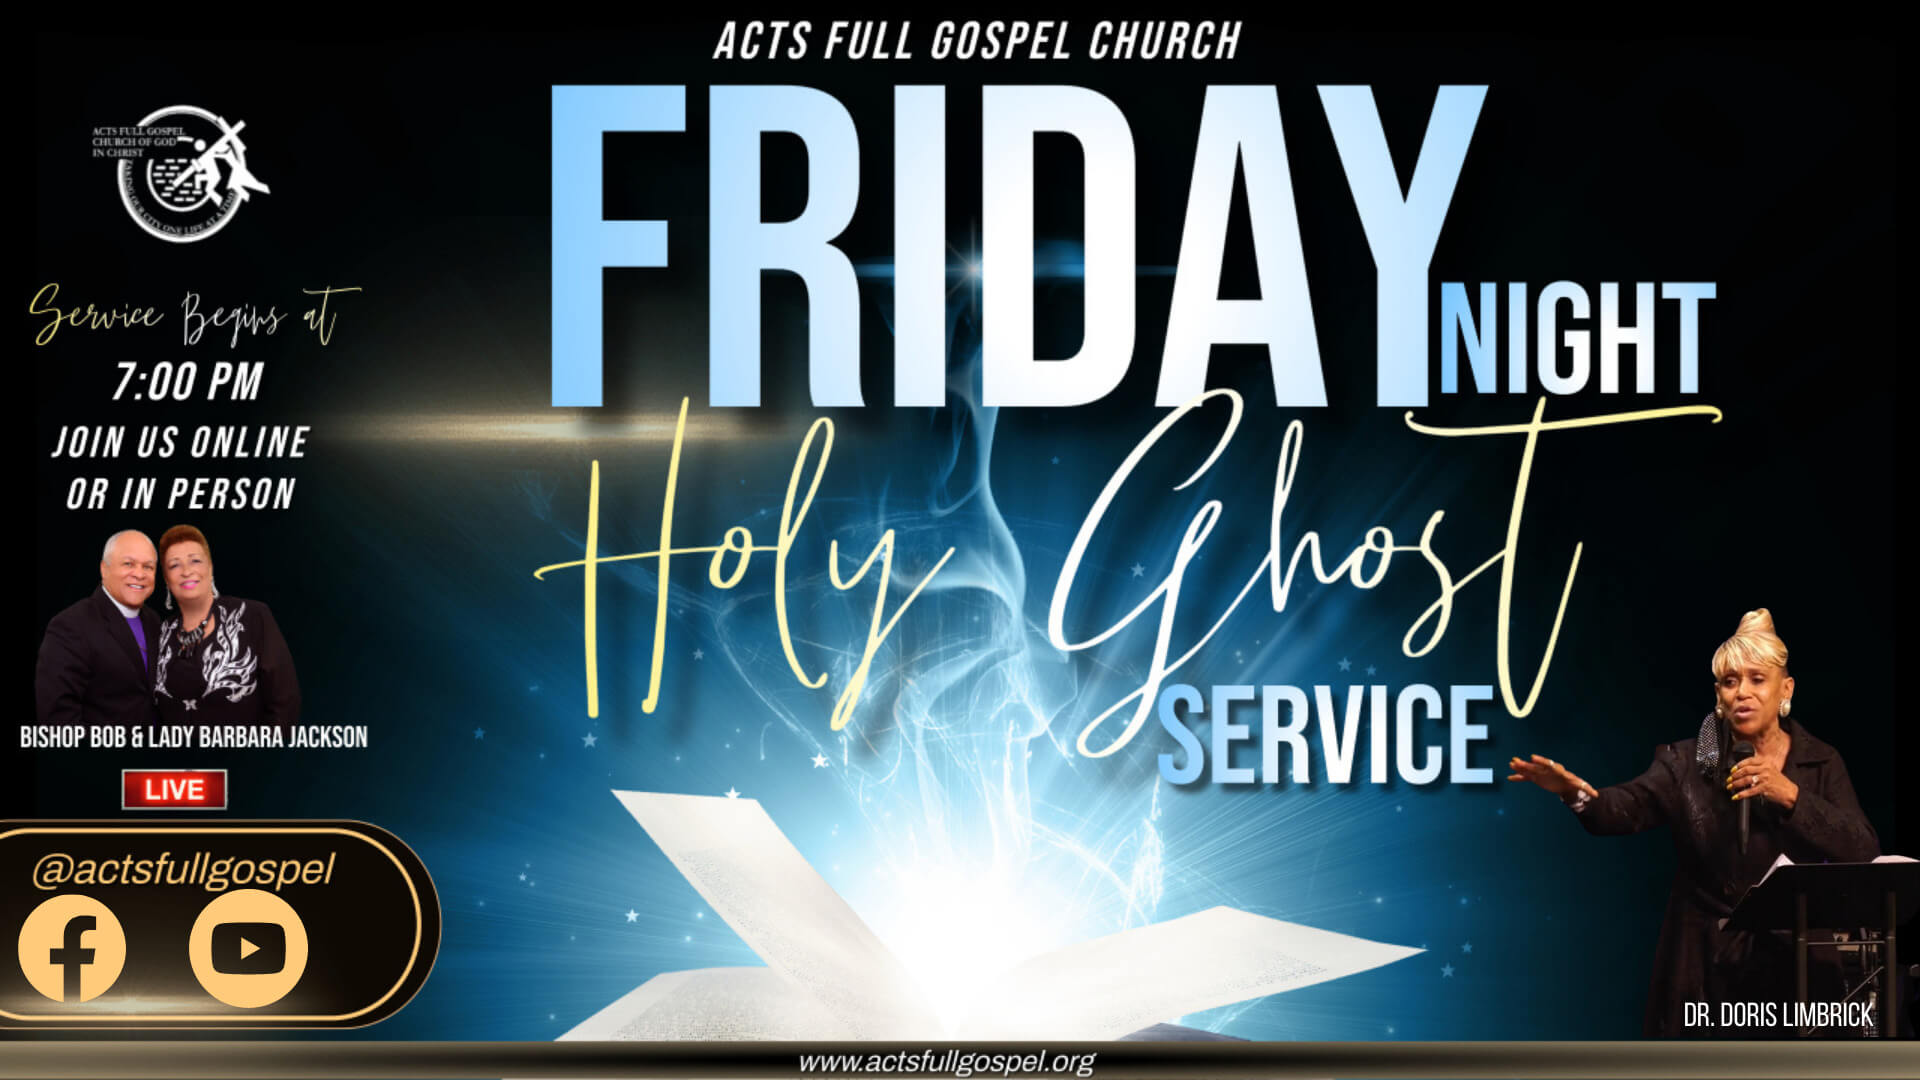 Friday Night Holy Ghost Service 5 2 (1) 1